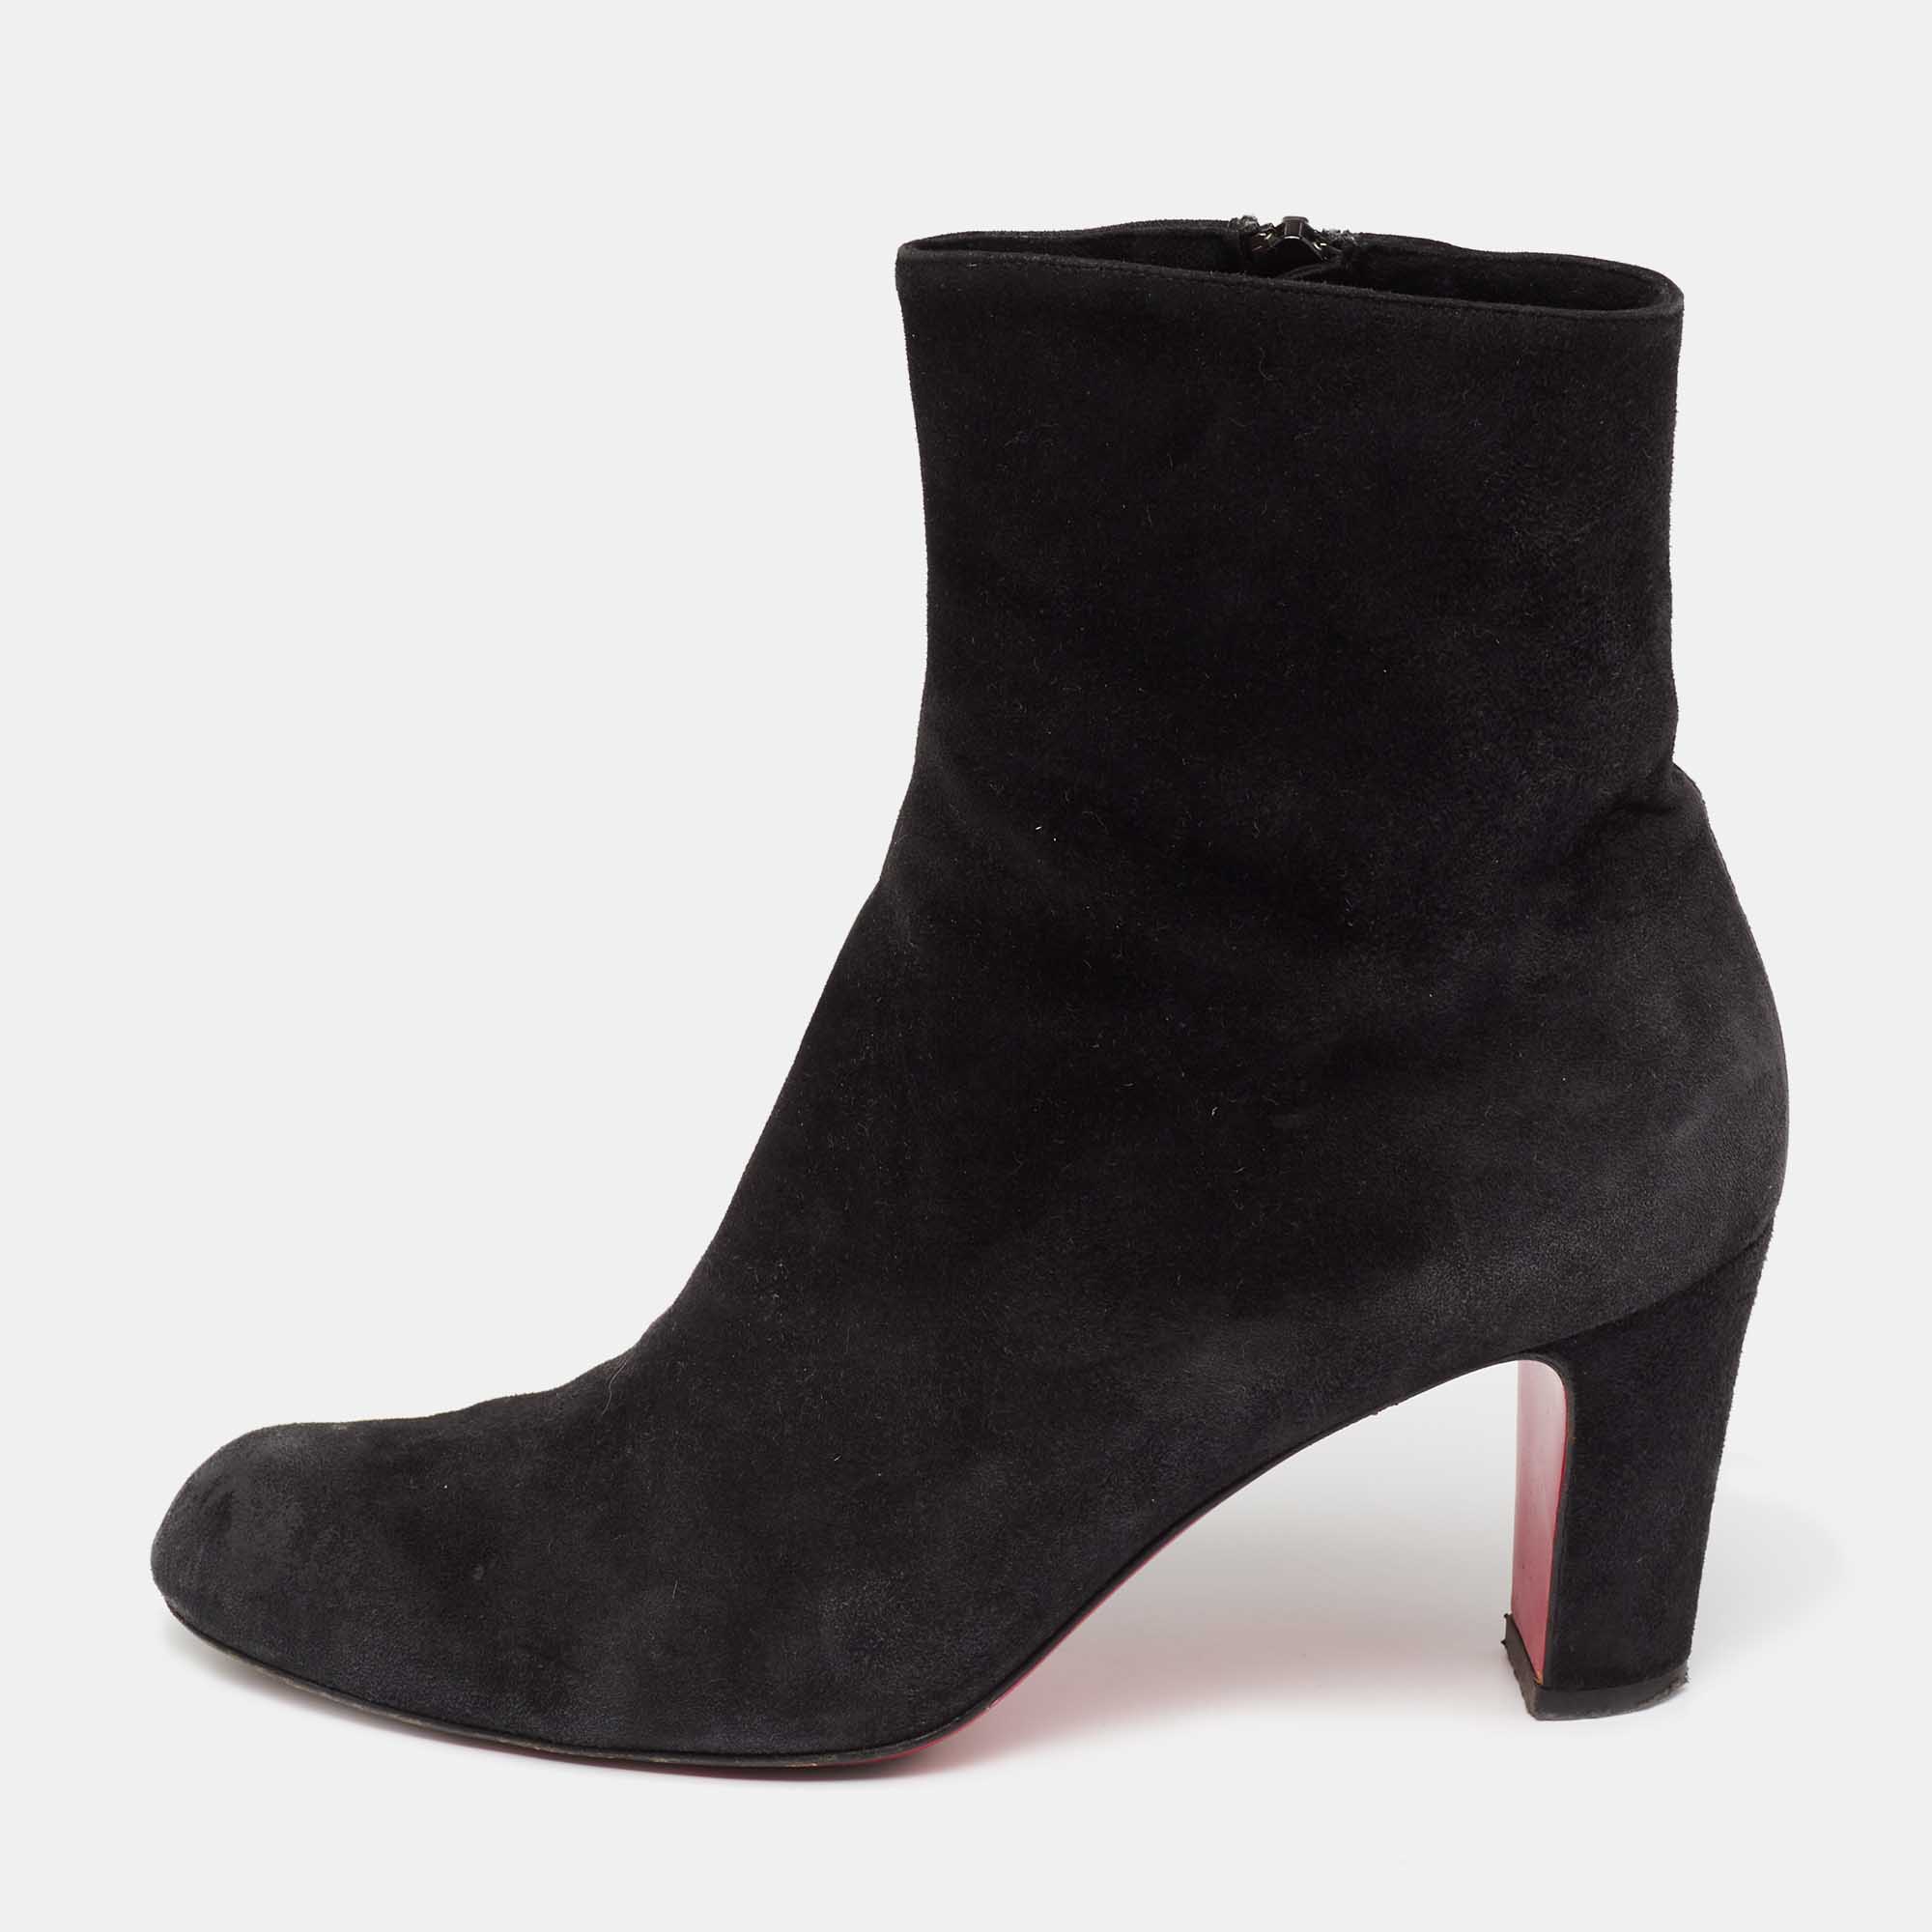 Pre-owned Christian Louboutin Black Suede Ankle Boots Size 36.5